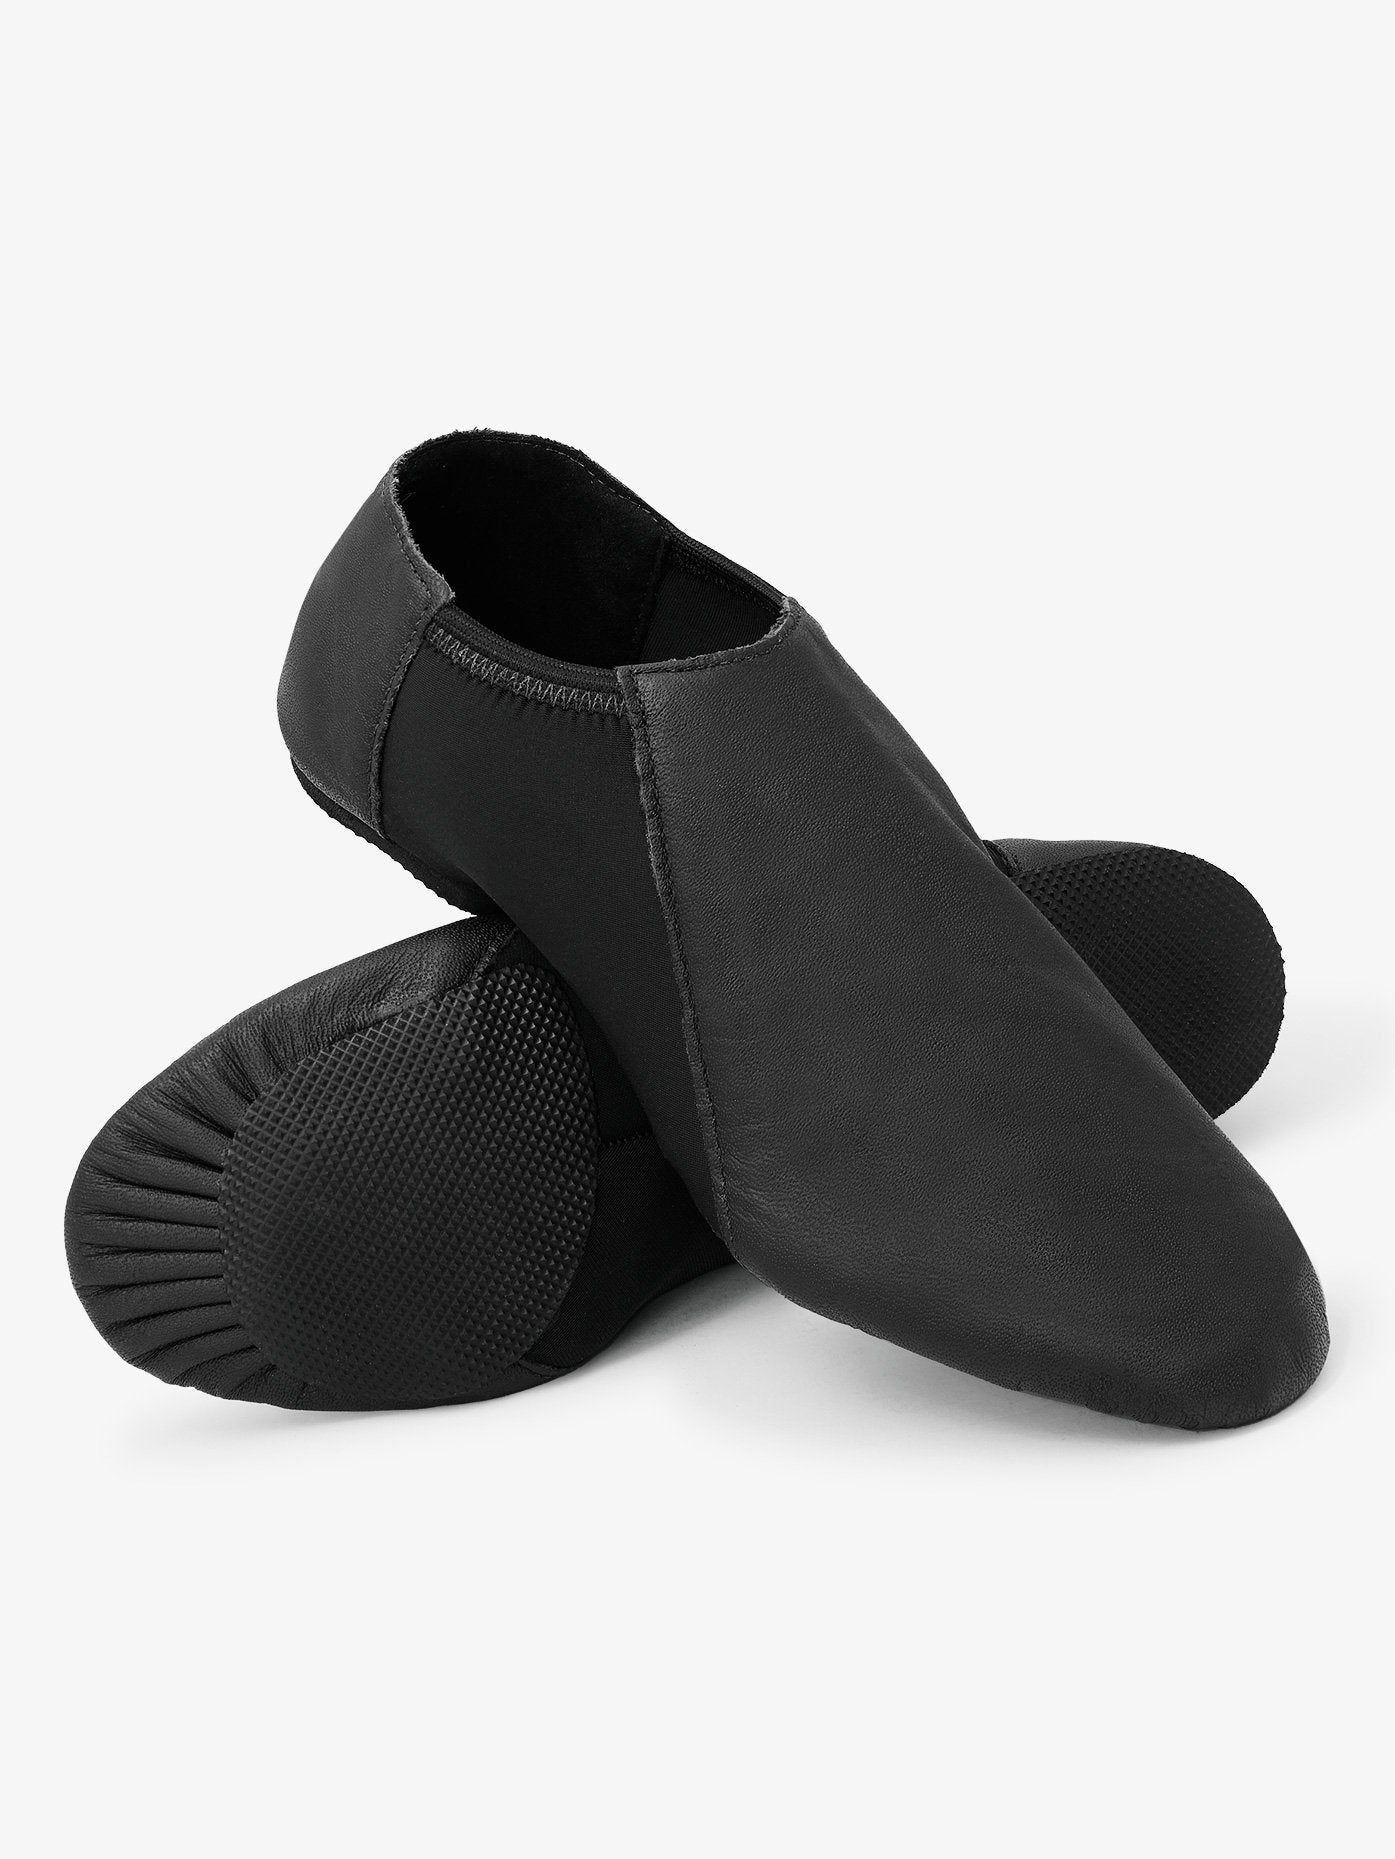 Black leather jazz shoes for girls with neoprene insert